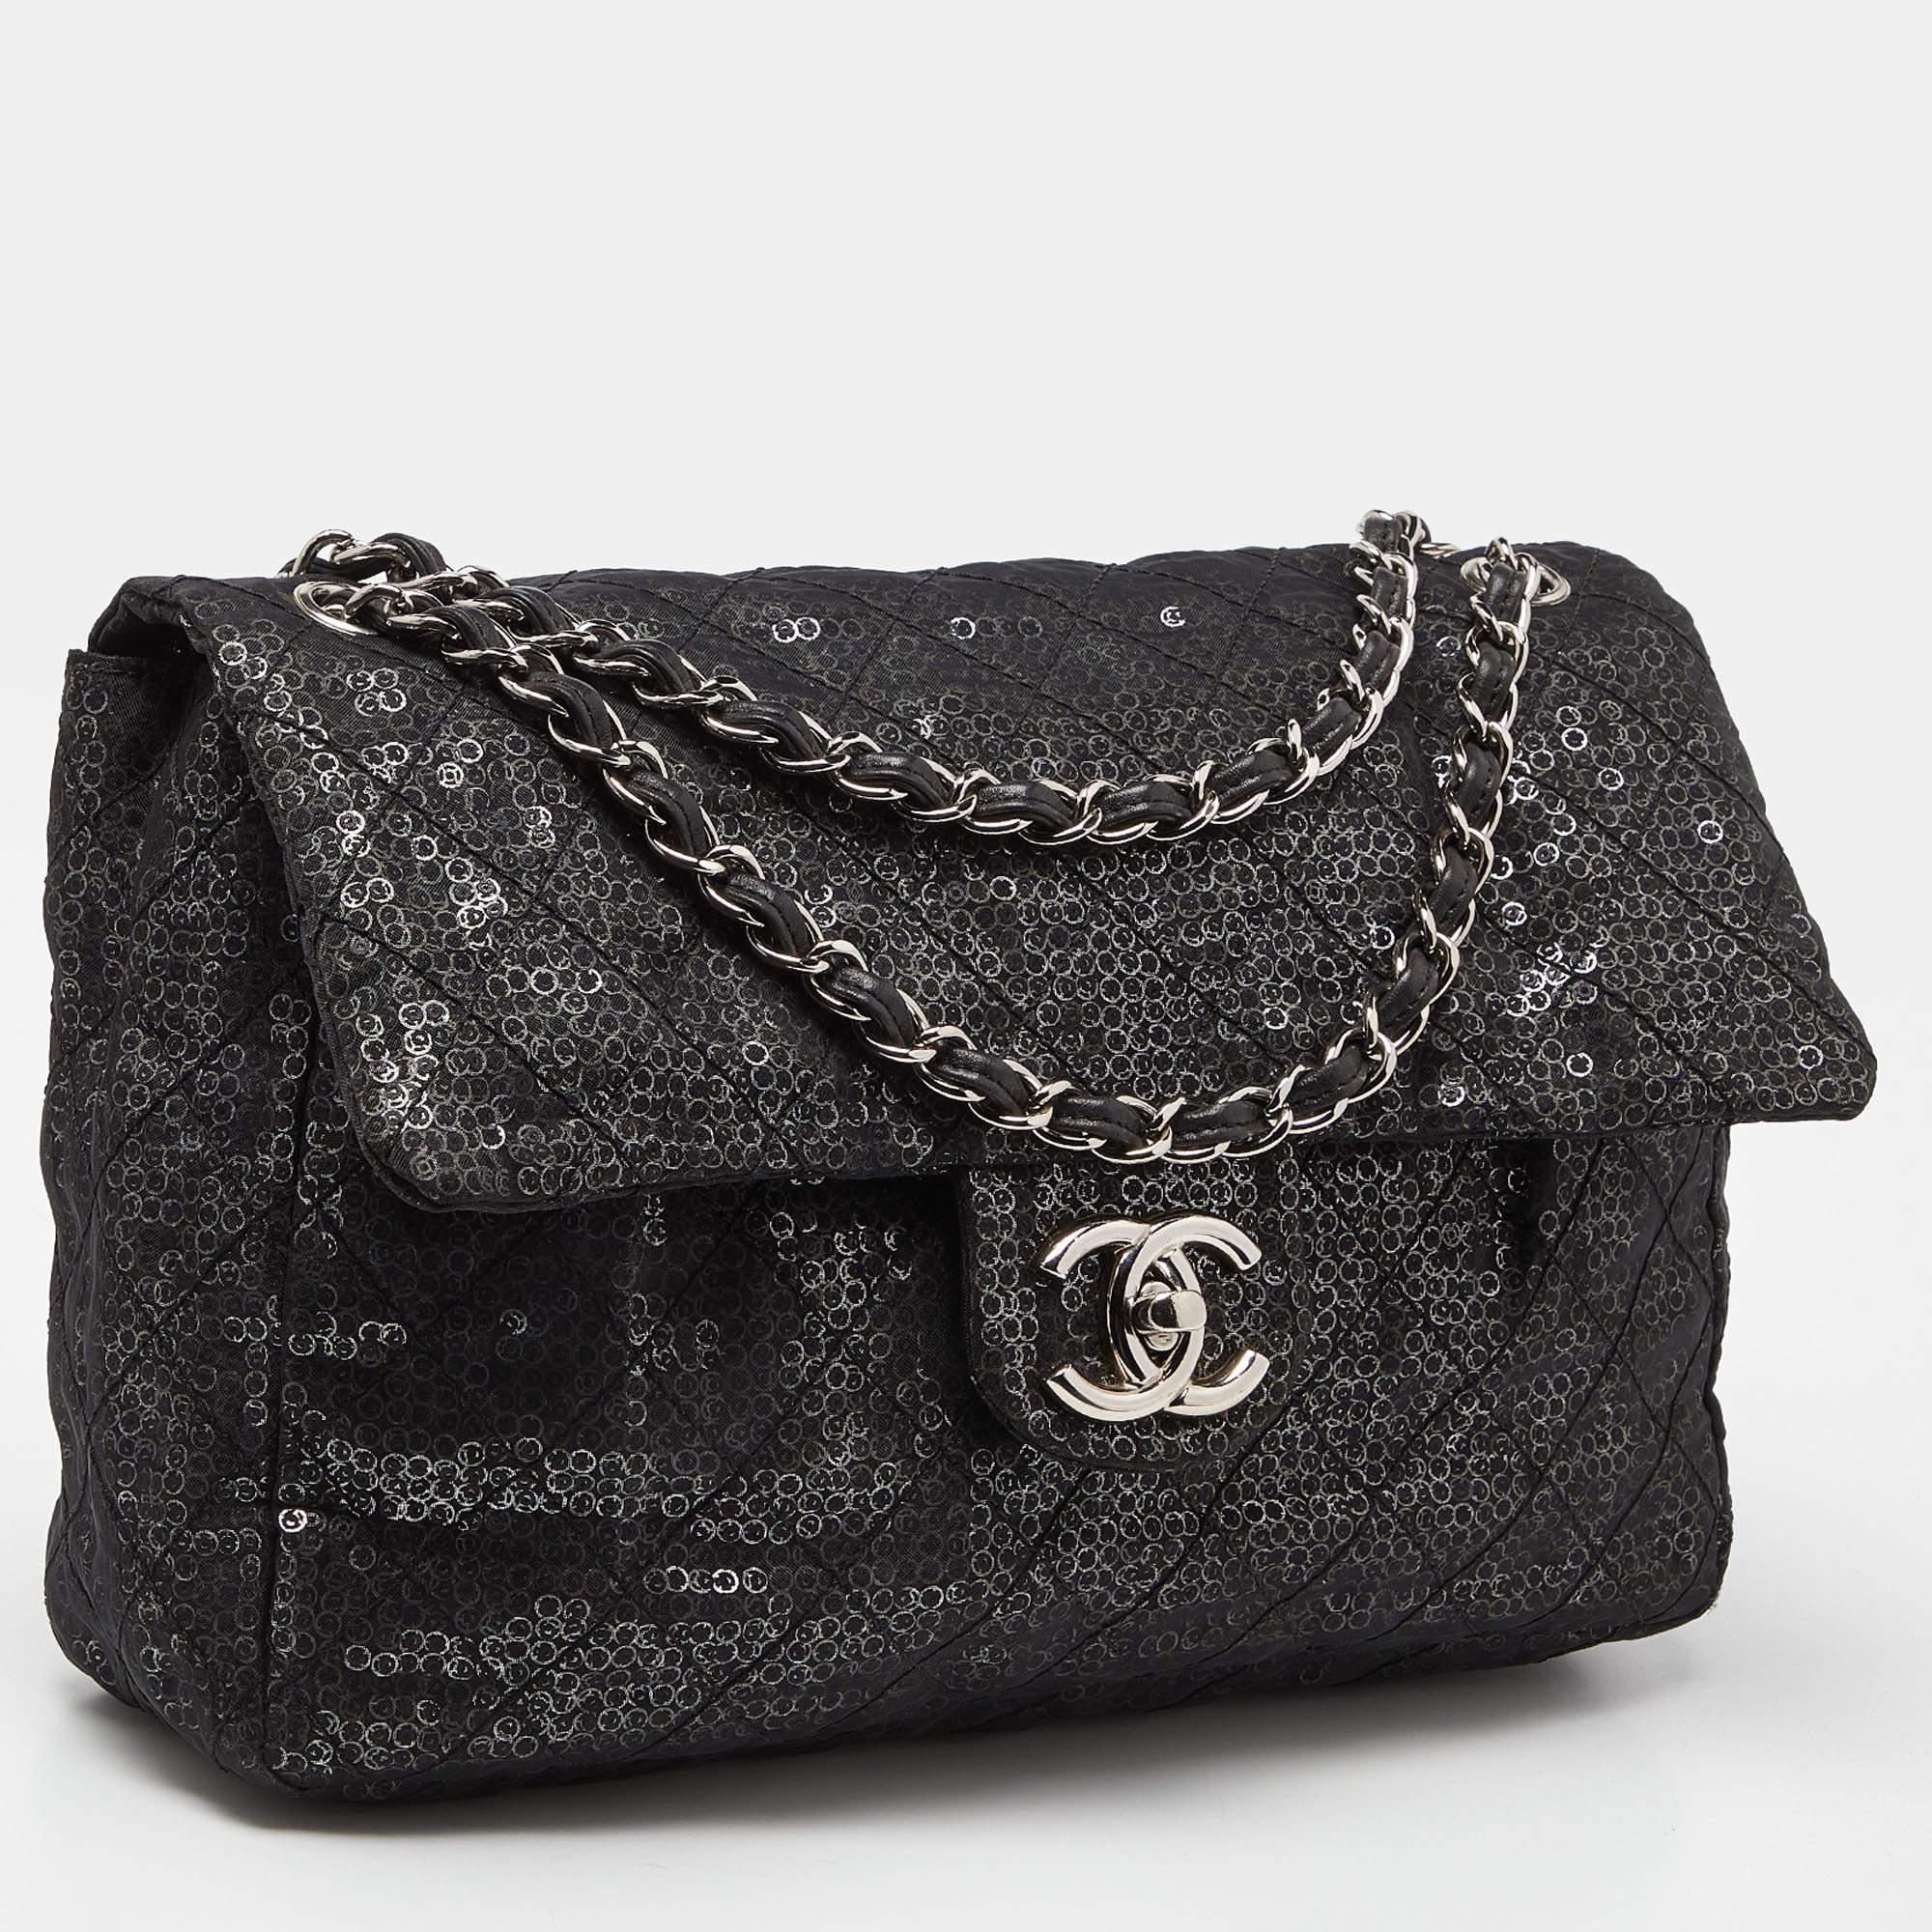 Chanel Black Mesh and Sequins Jumbo Classic Flap Bag In Good Condition For Sale In Dubai, Al Qouz 2